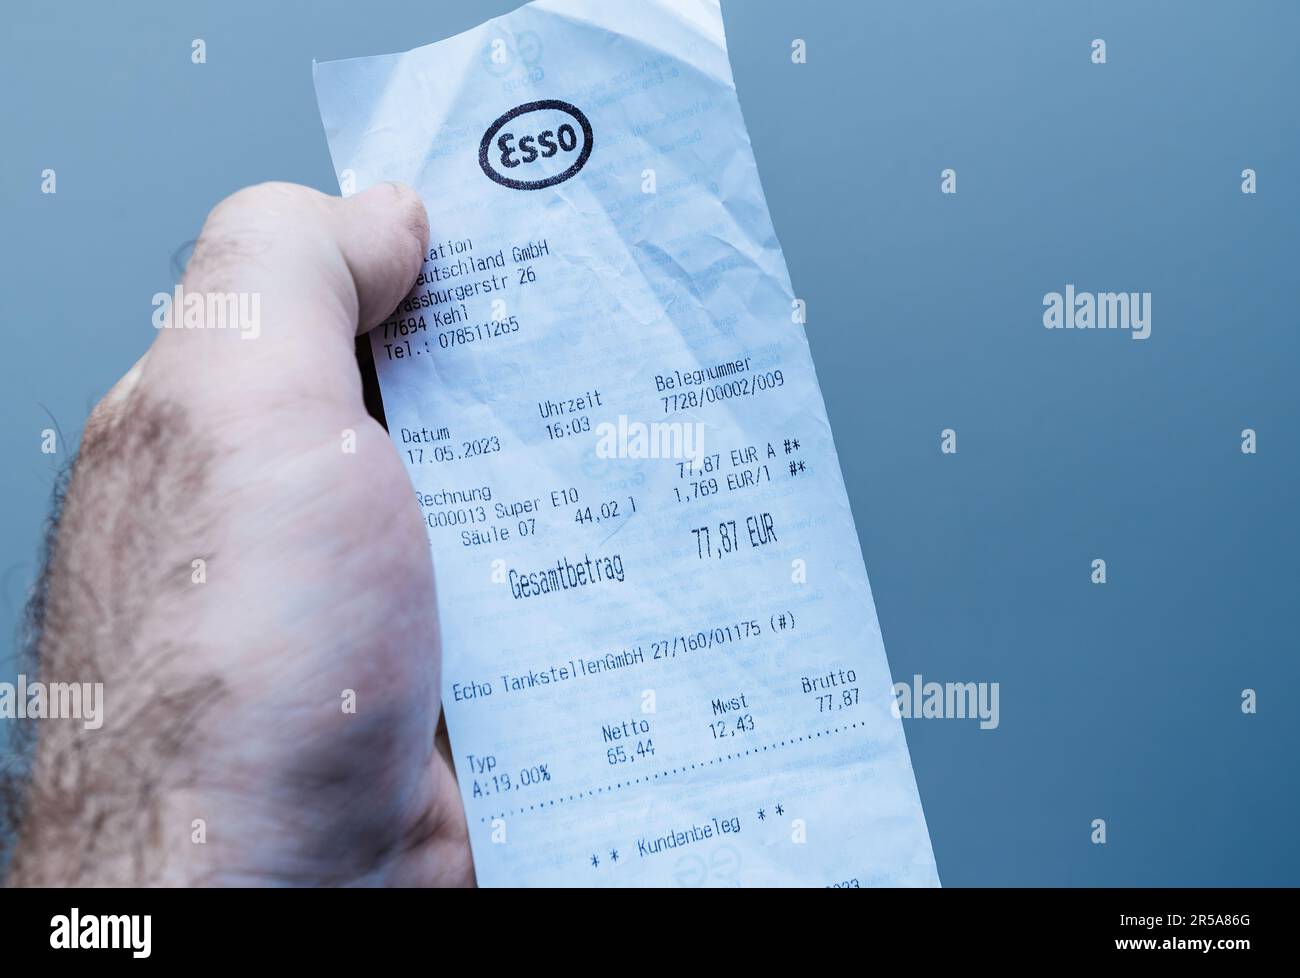 Germany - MAy 30, 2023: A male hand holding a paper receipt against a blue close-up background from the Esso gas station. Stock Photo